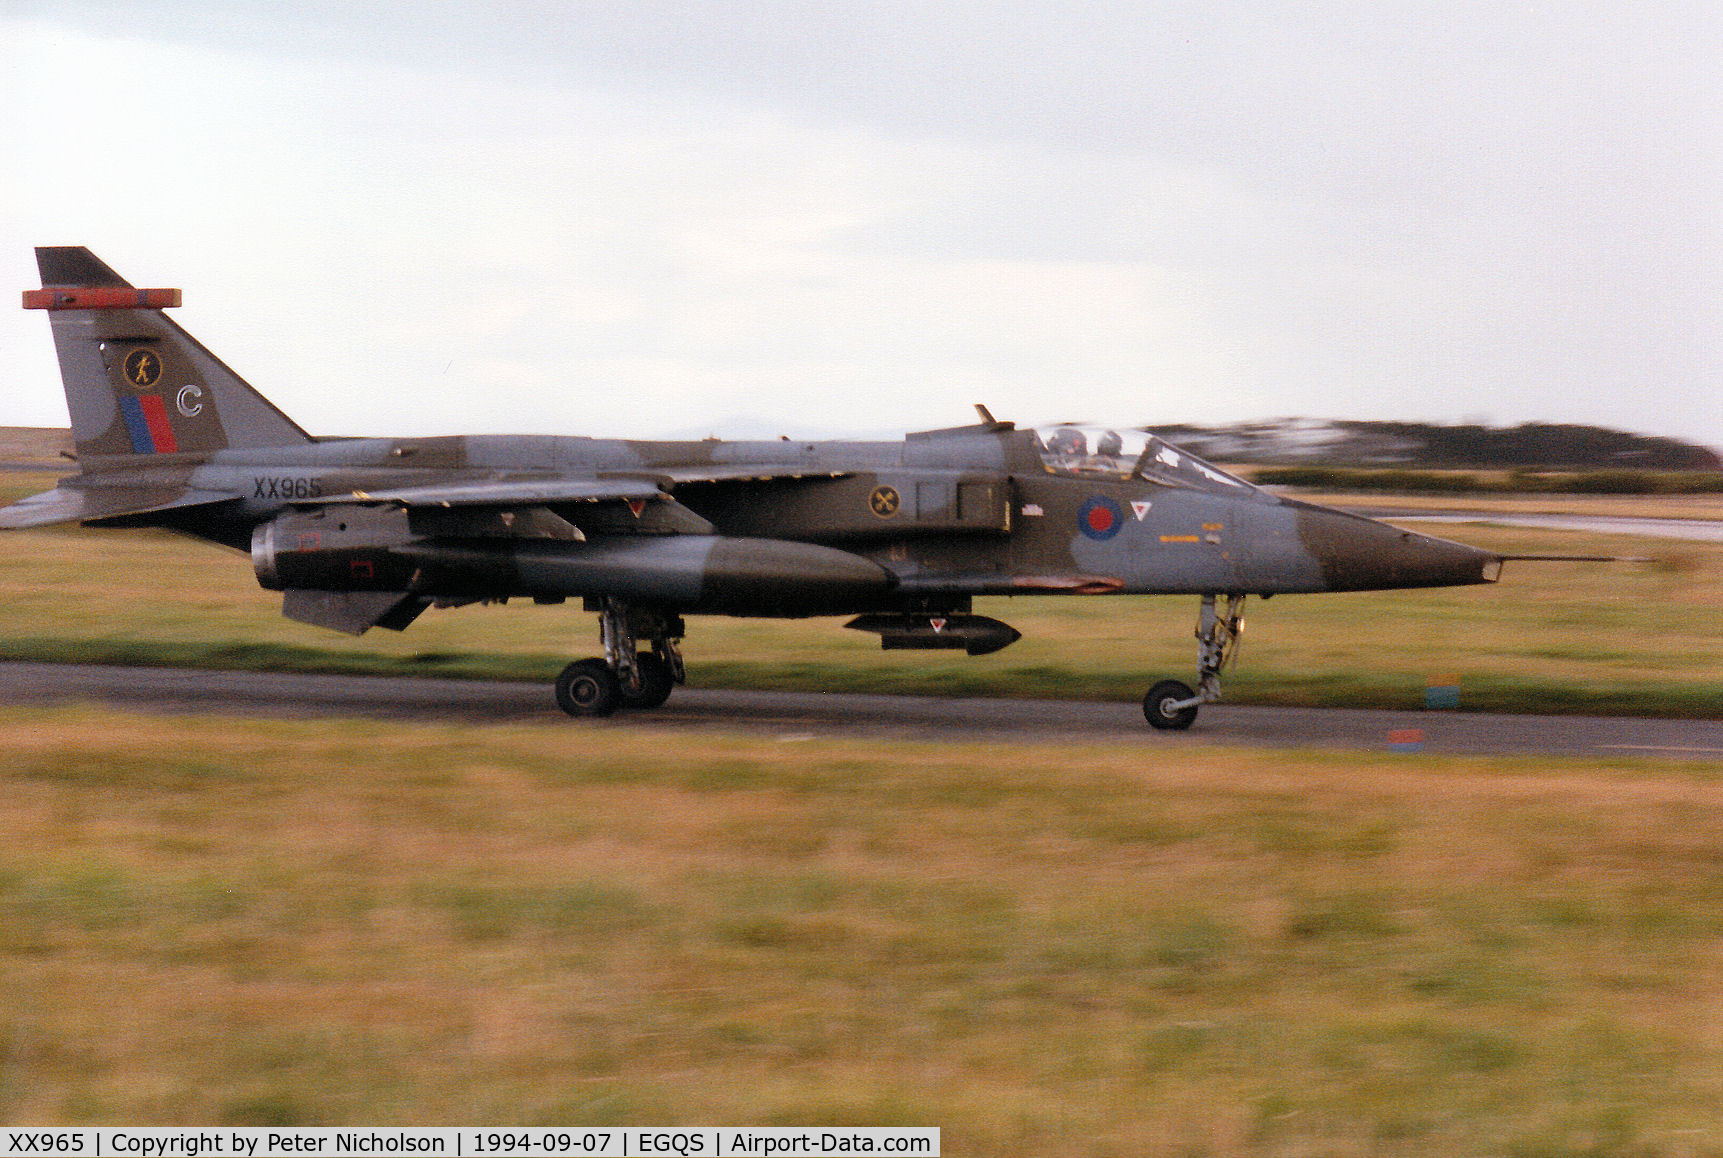 XX965, 1975 Sepecat Jaguar GR.1A C/N S.87, Jaguar GR.1A of 16[Reserve] Squadron taxying to Runway 05 at RAF Lossiemouth in September 1994.